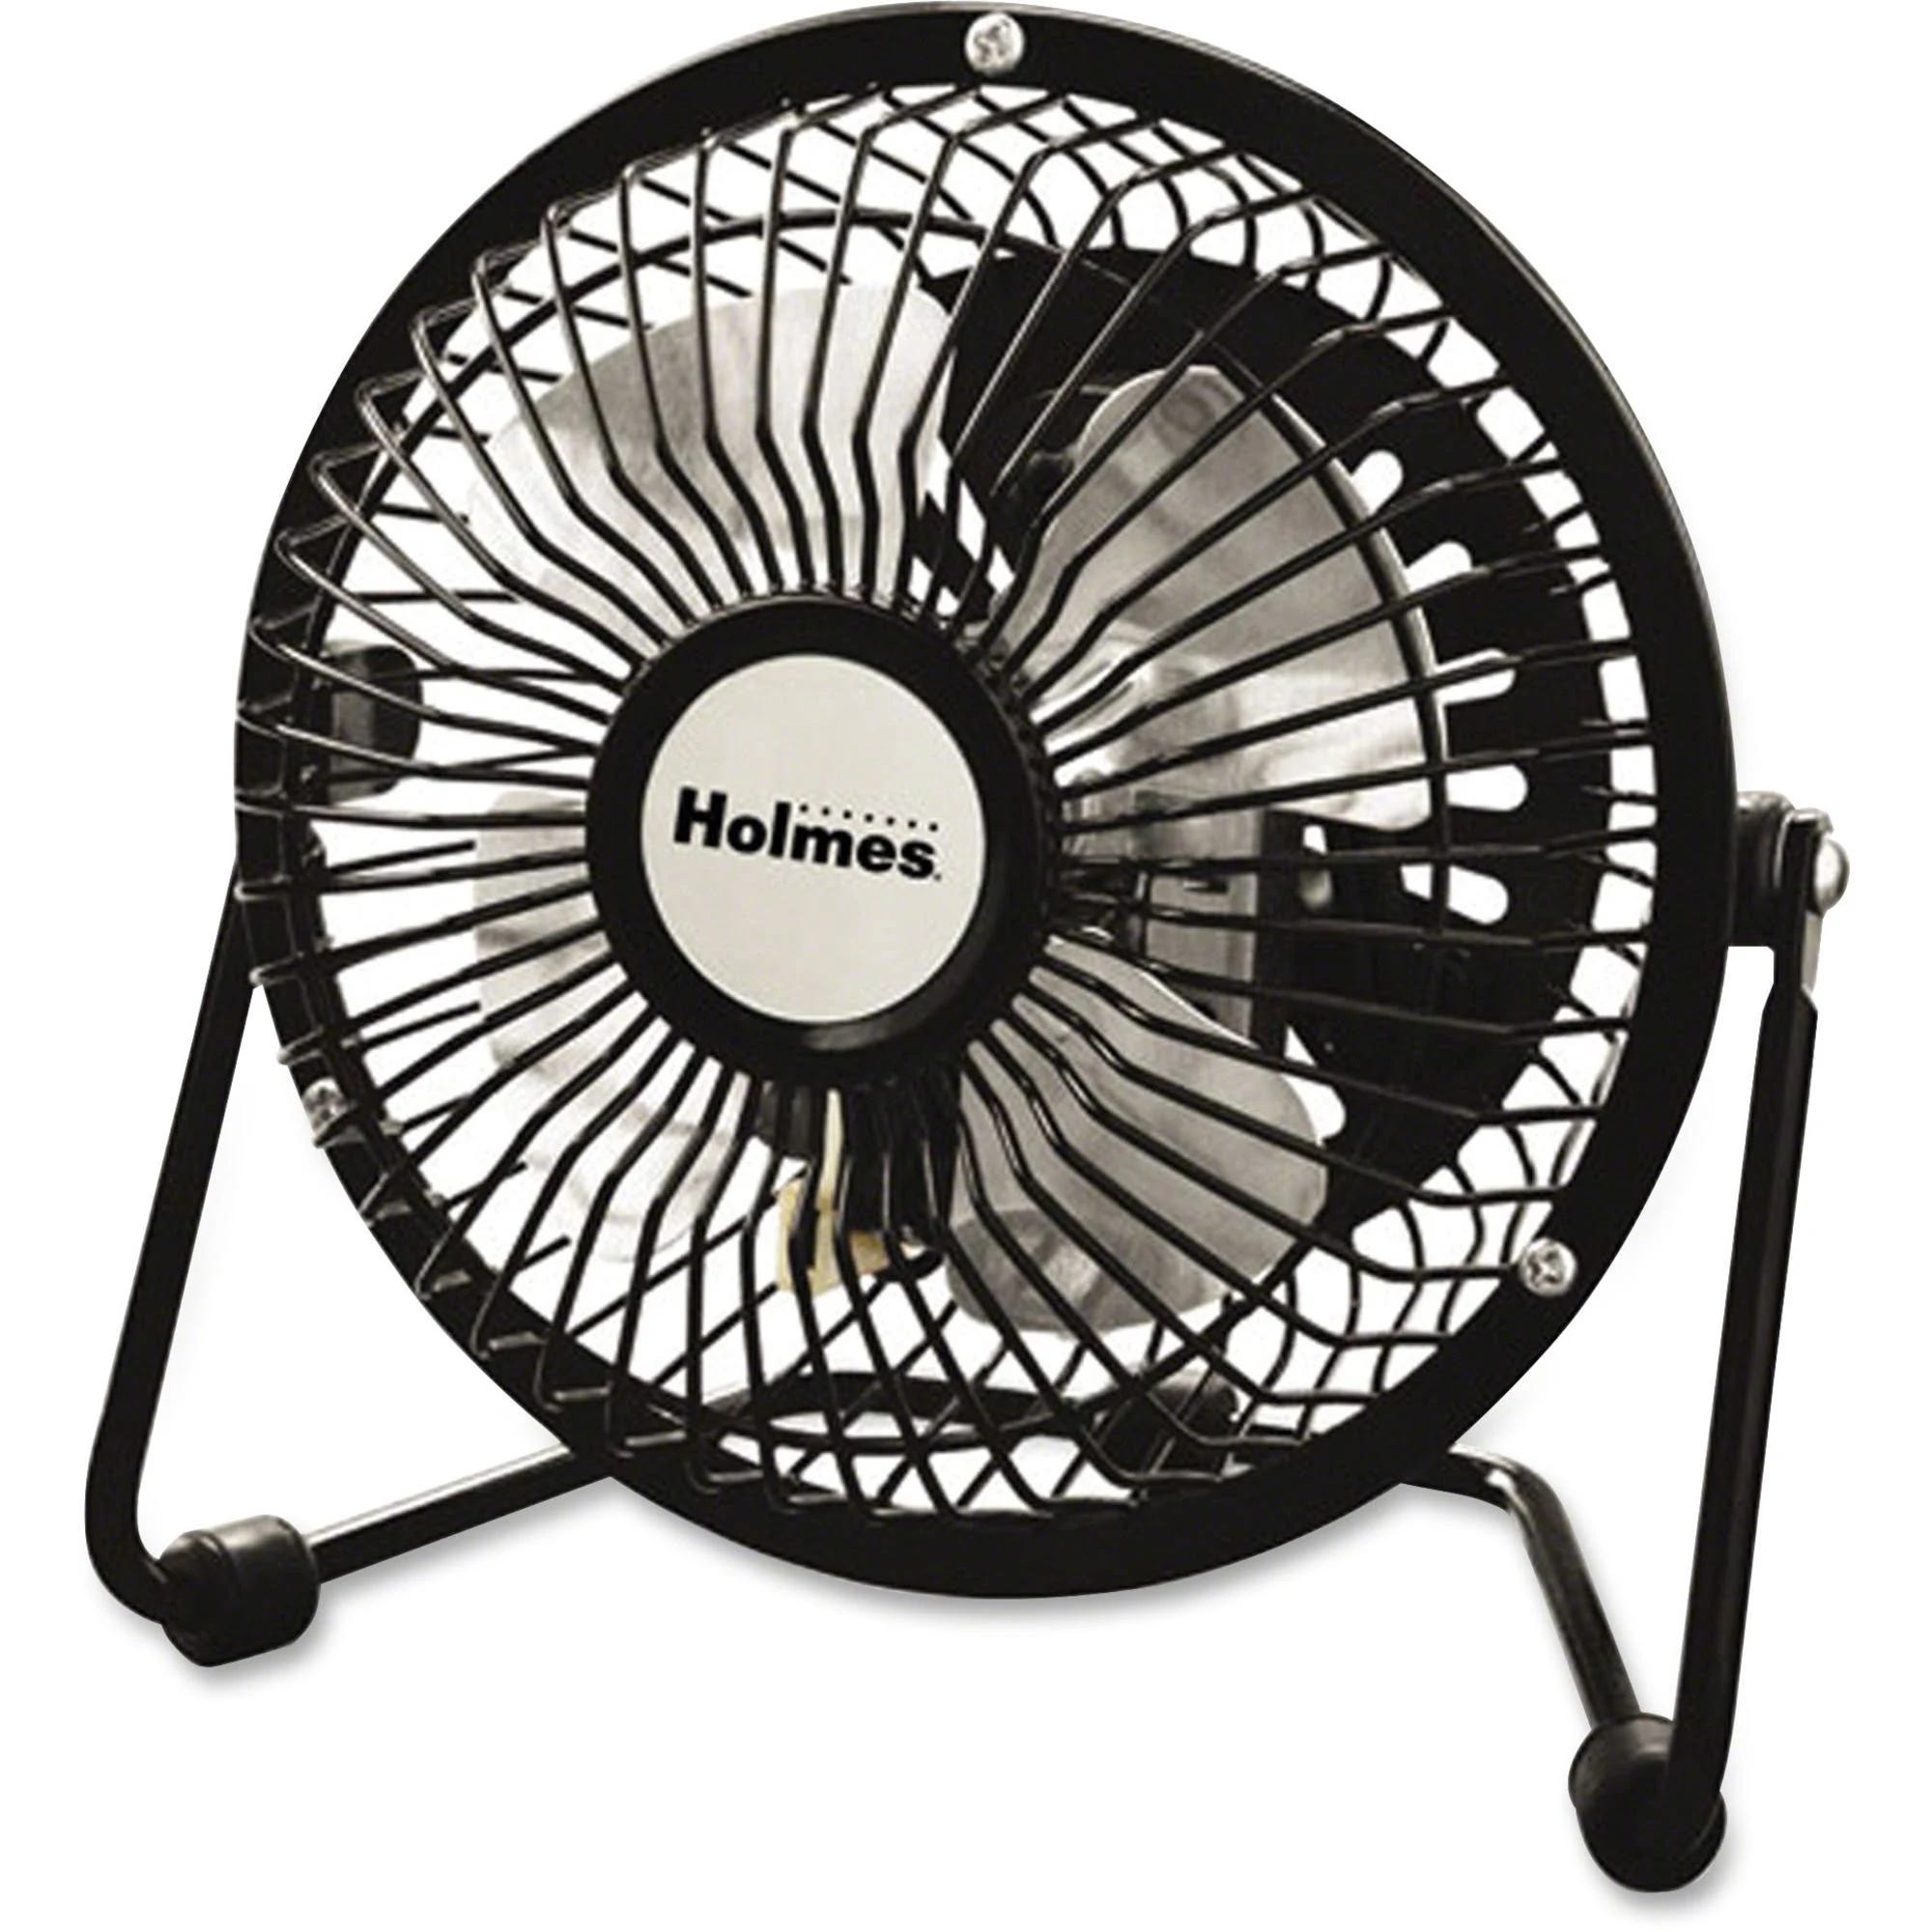 Ultra Quiet Portable Table Size Fan by Holmes | Image